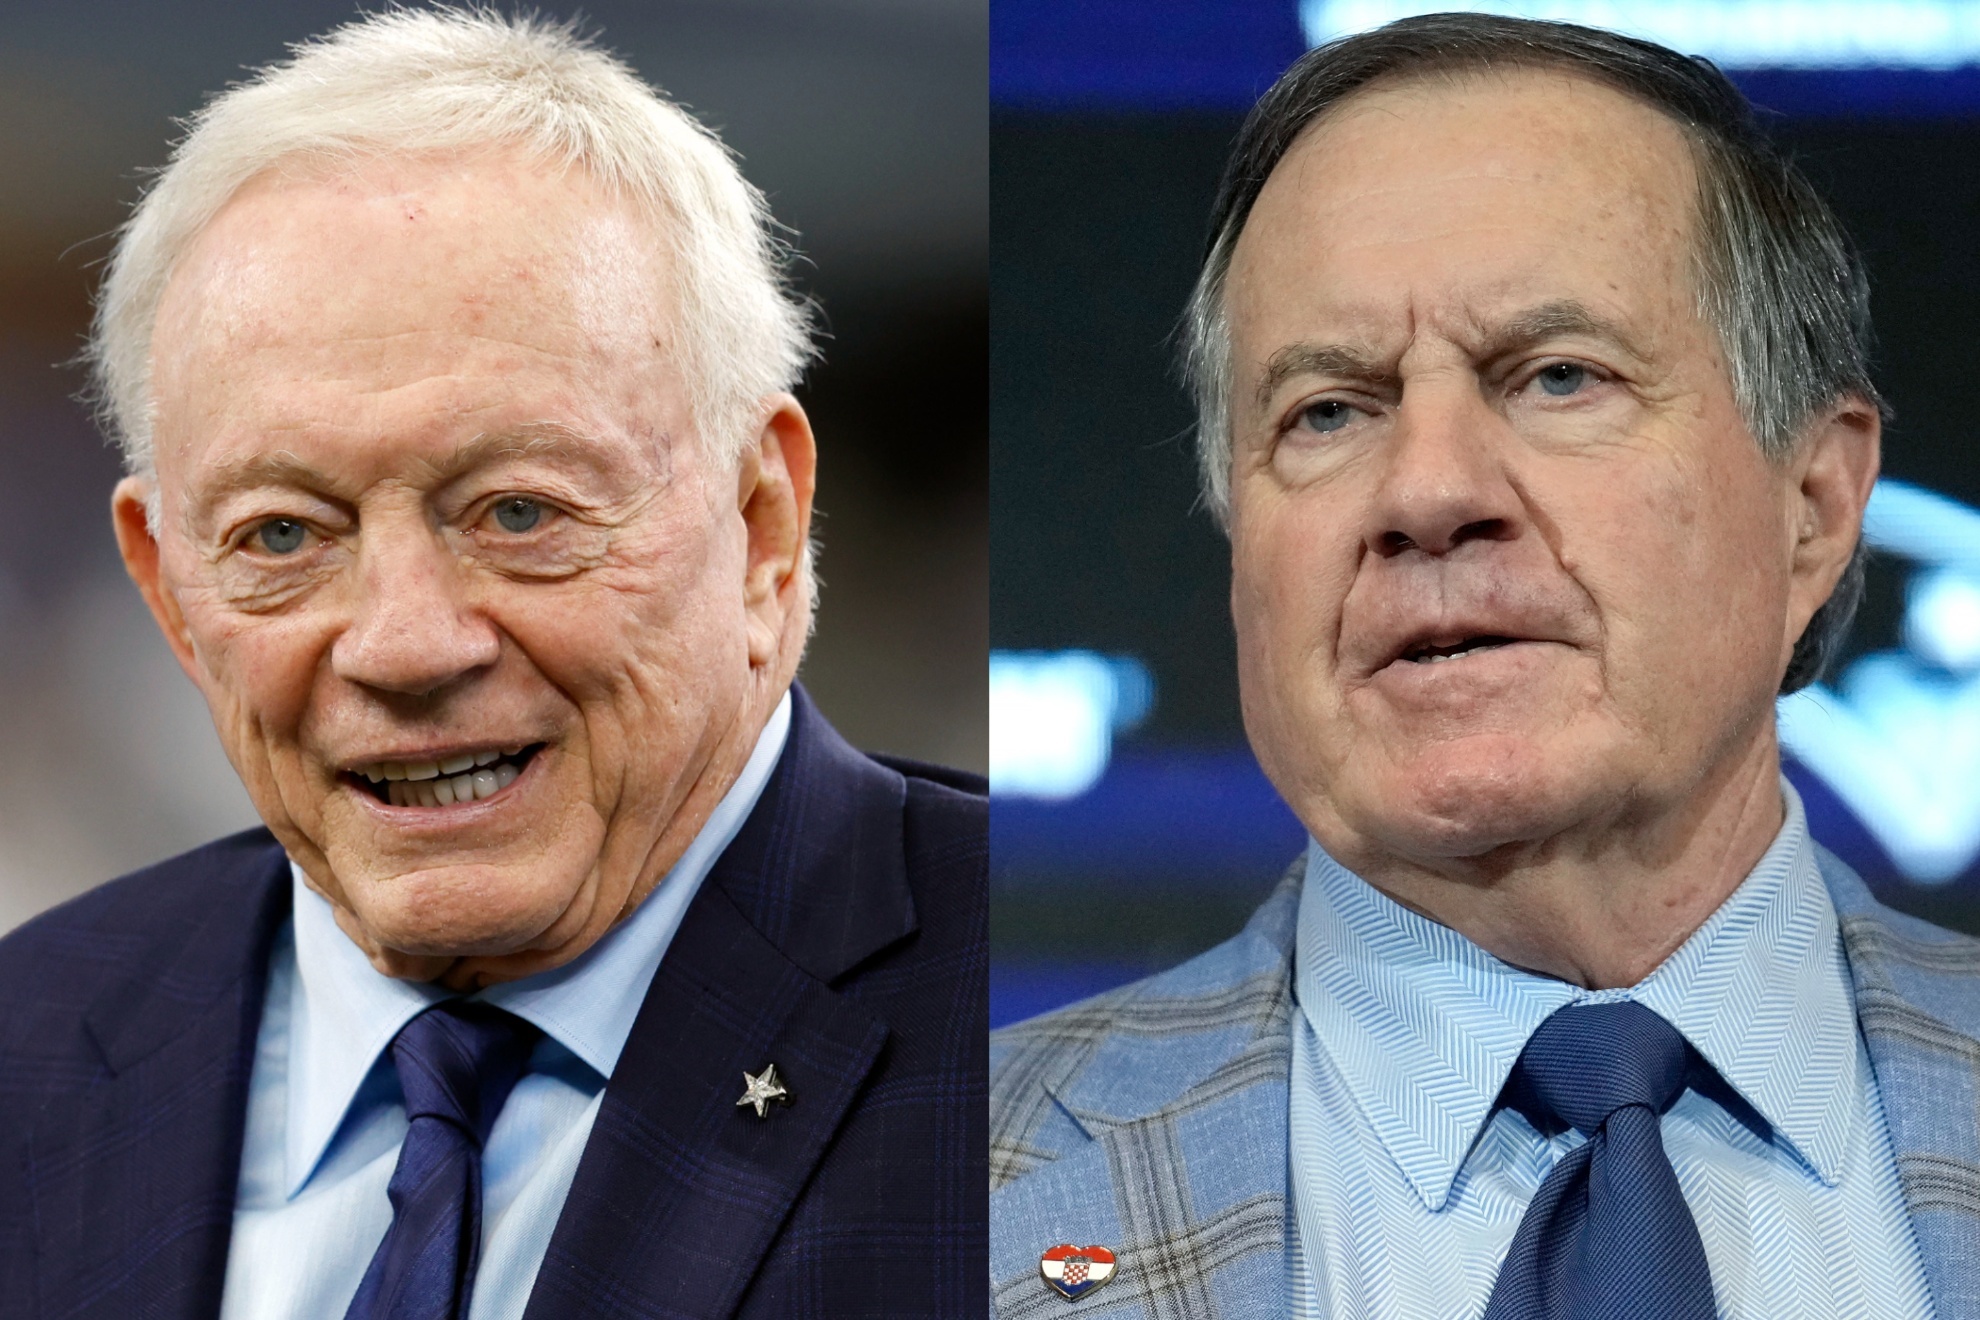 Unveiling the IRS Watch Billionaire NFL Owners Under Scrutiny for Taxes.